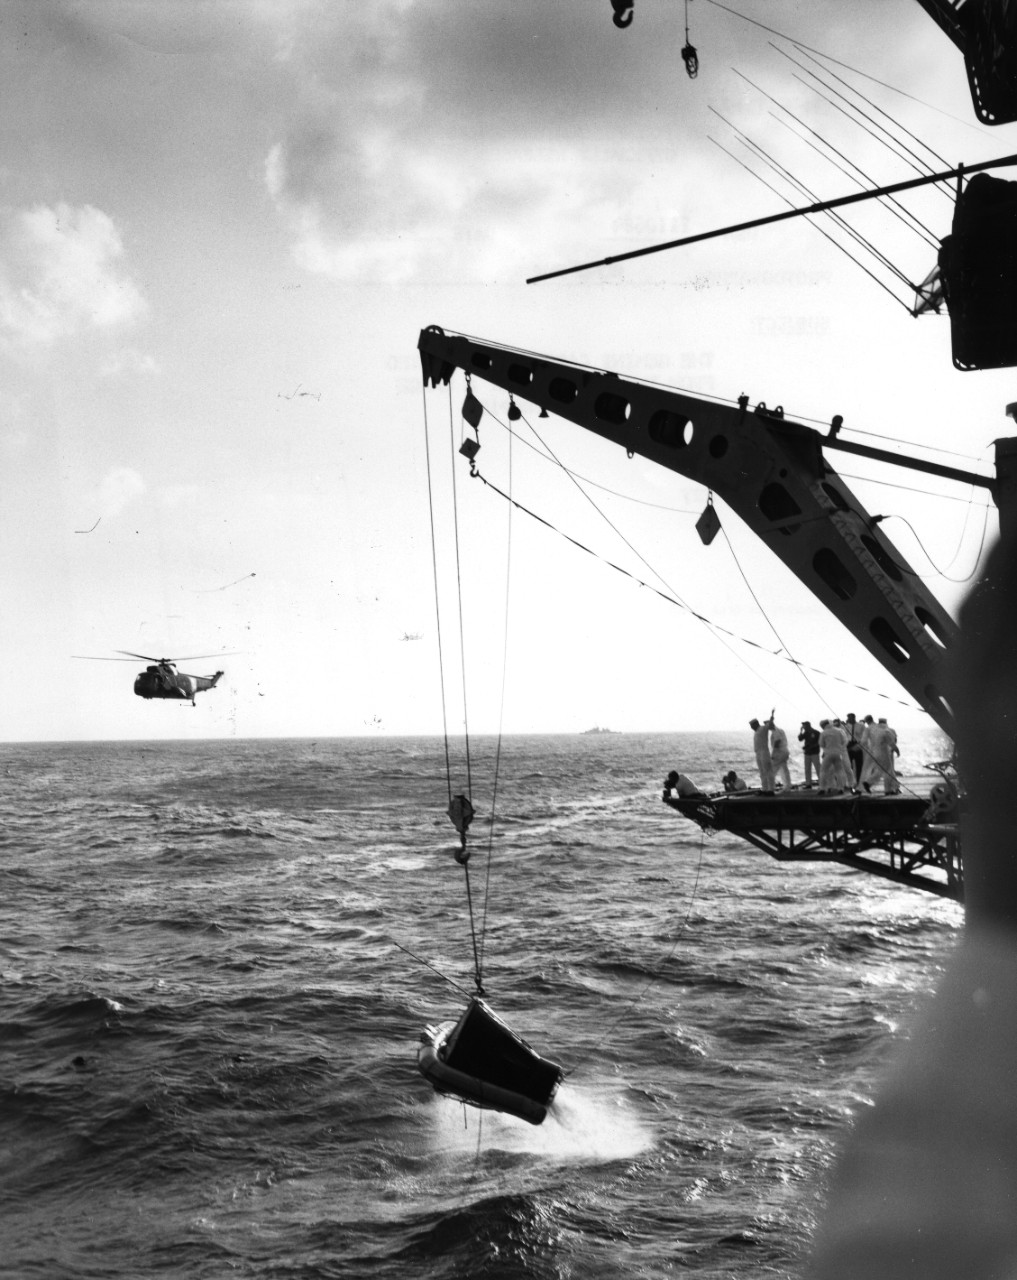 The Gemini 3 capsule is hoisted from the Atlantic Ocean by a large crane on board USS Intrepid (CV-11). Note the helicopter in the background, likely from squadron HS-3.